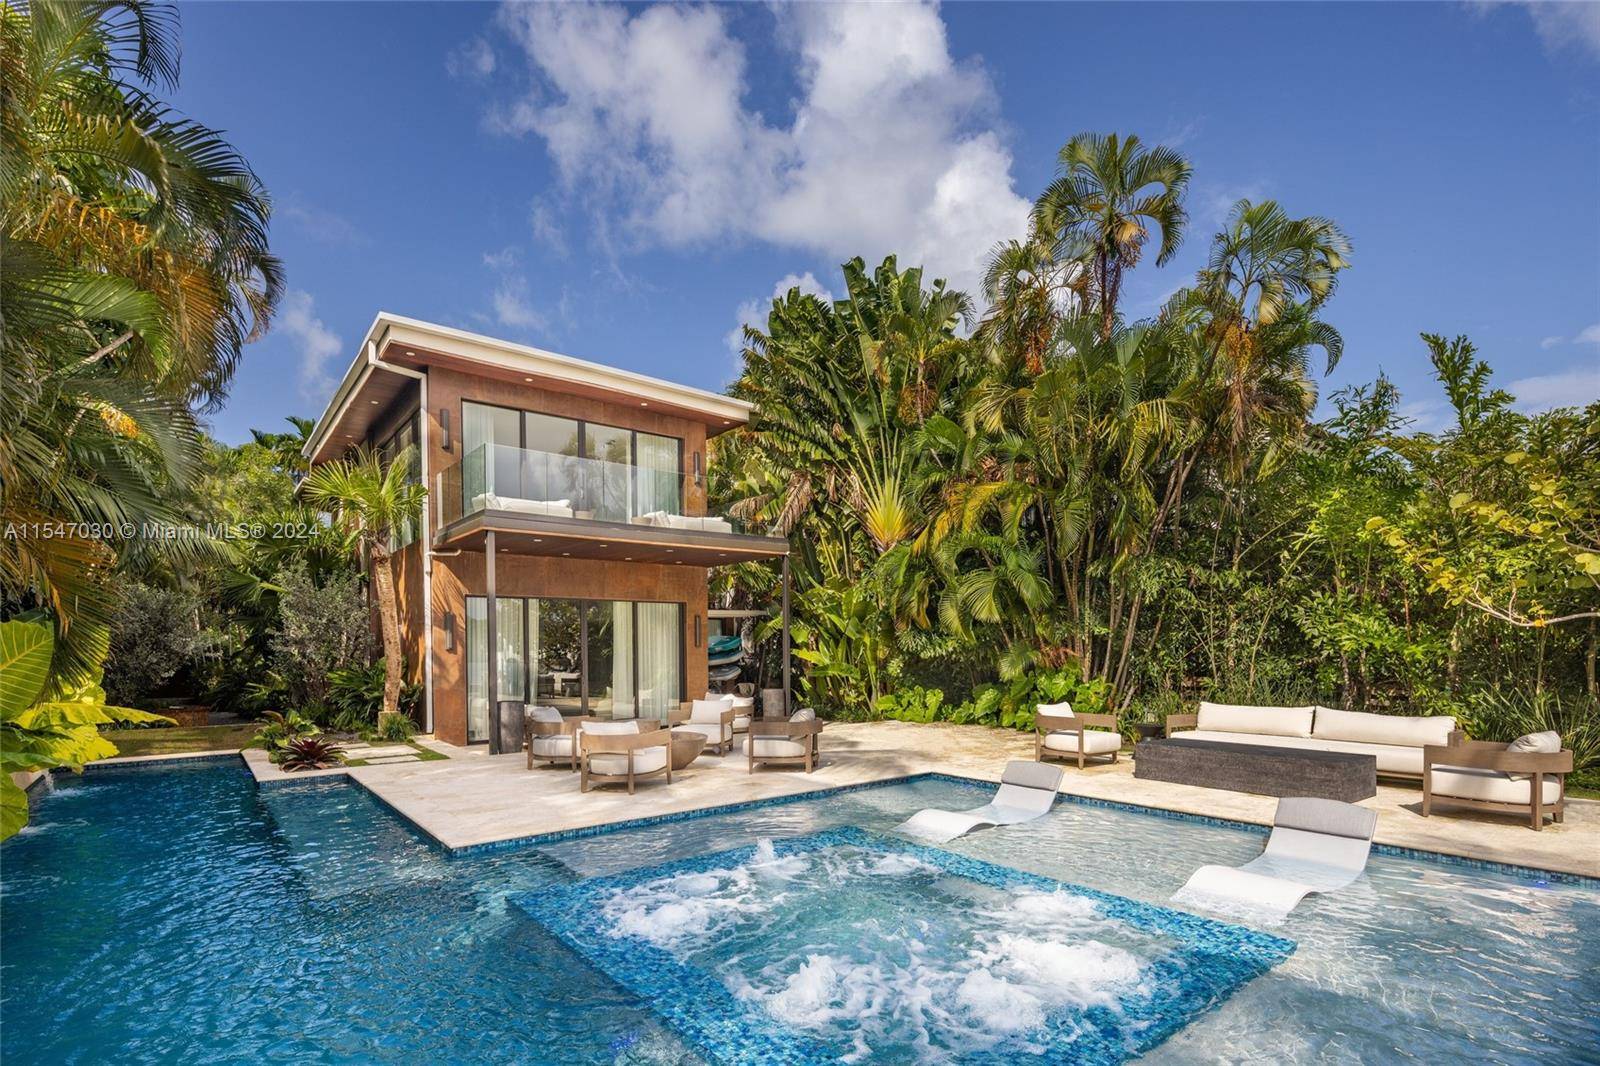 Amazing house with 4 bedroom, 4 bathroom single family home, elegantly positioned on the Intracoastal Waterways and paired with an unparalleled panorama of the Miami's famous downtown skyline.